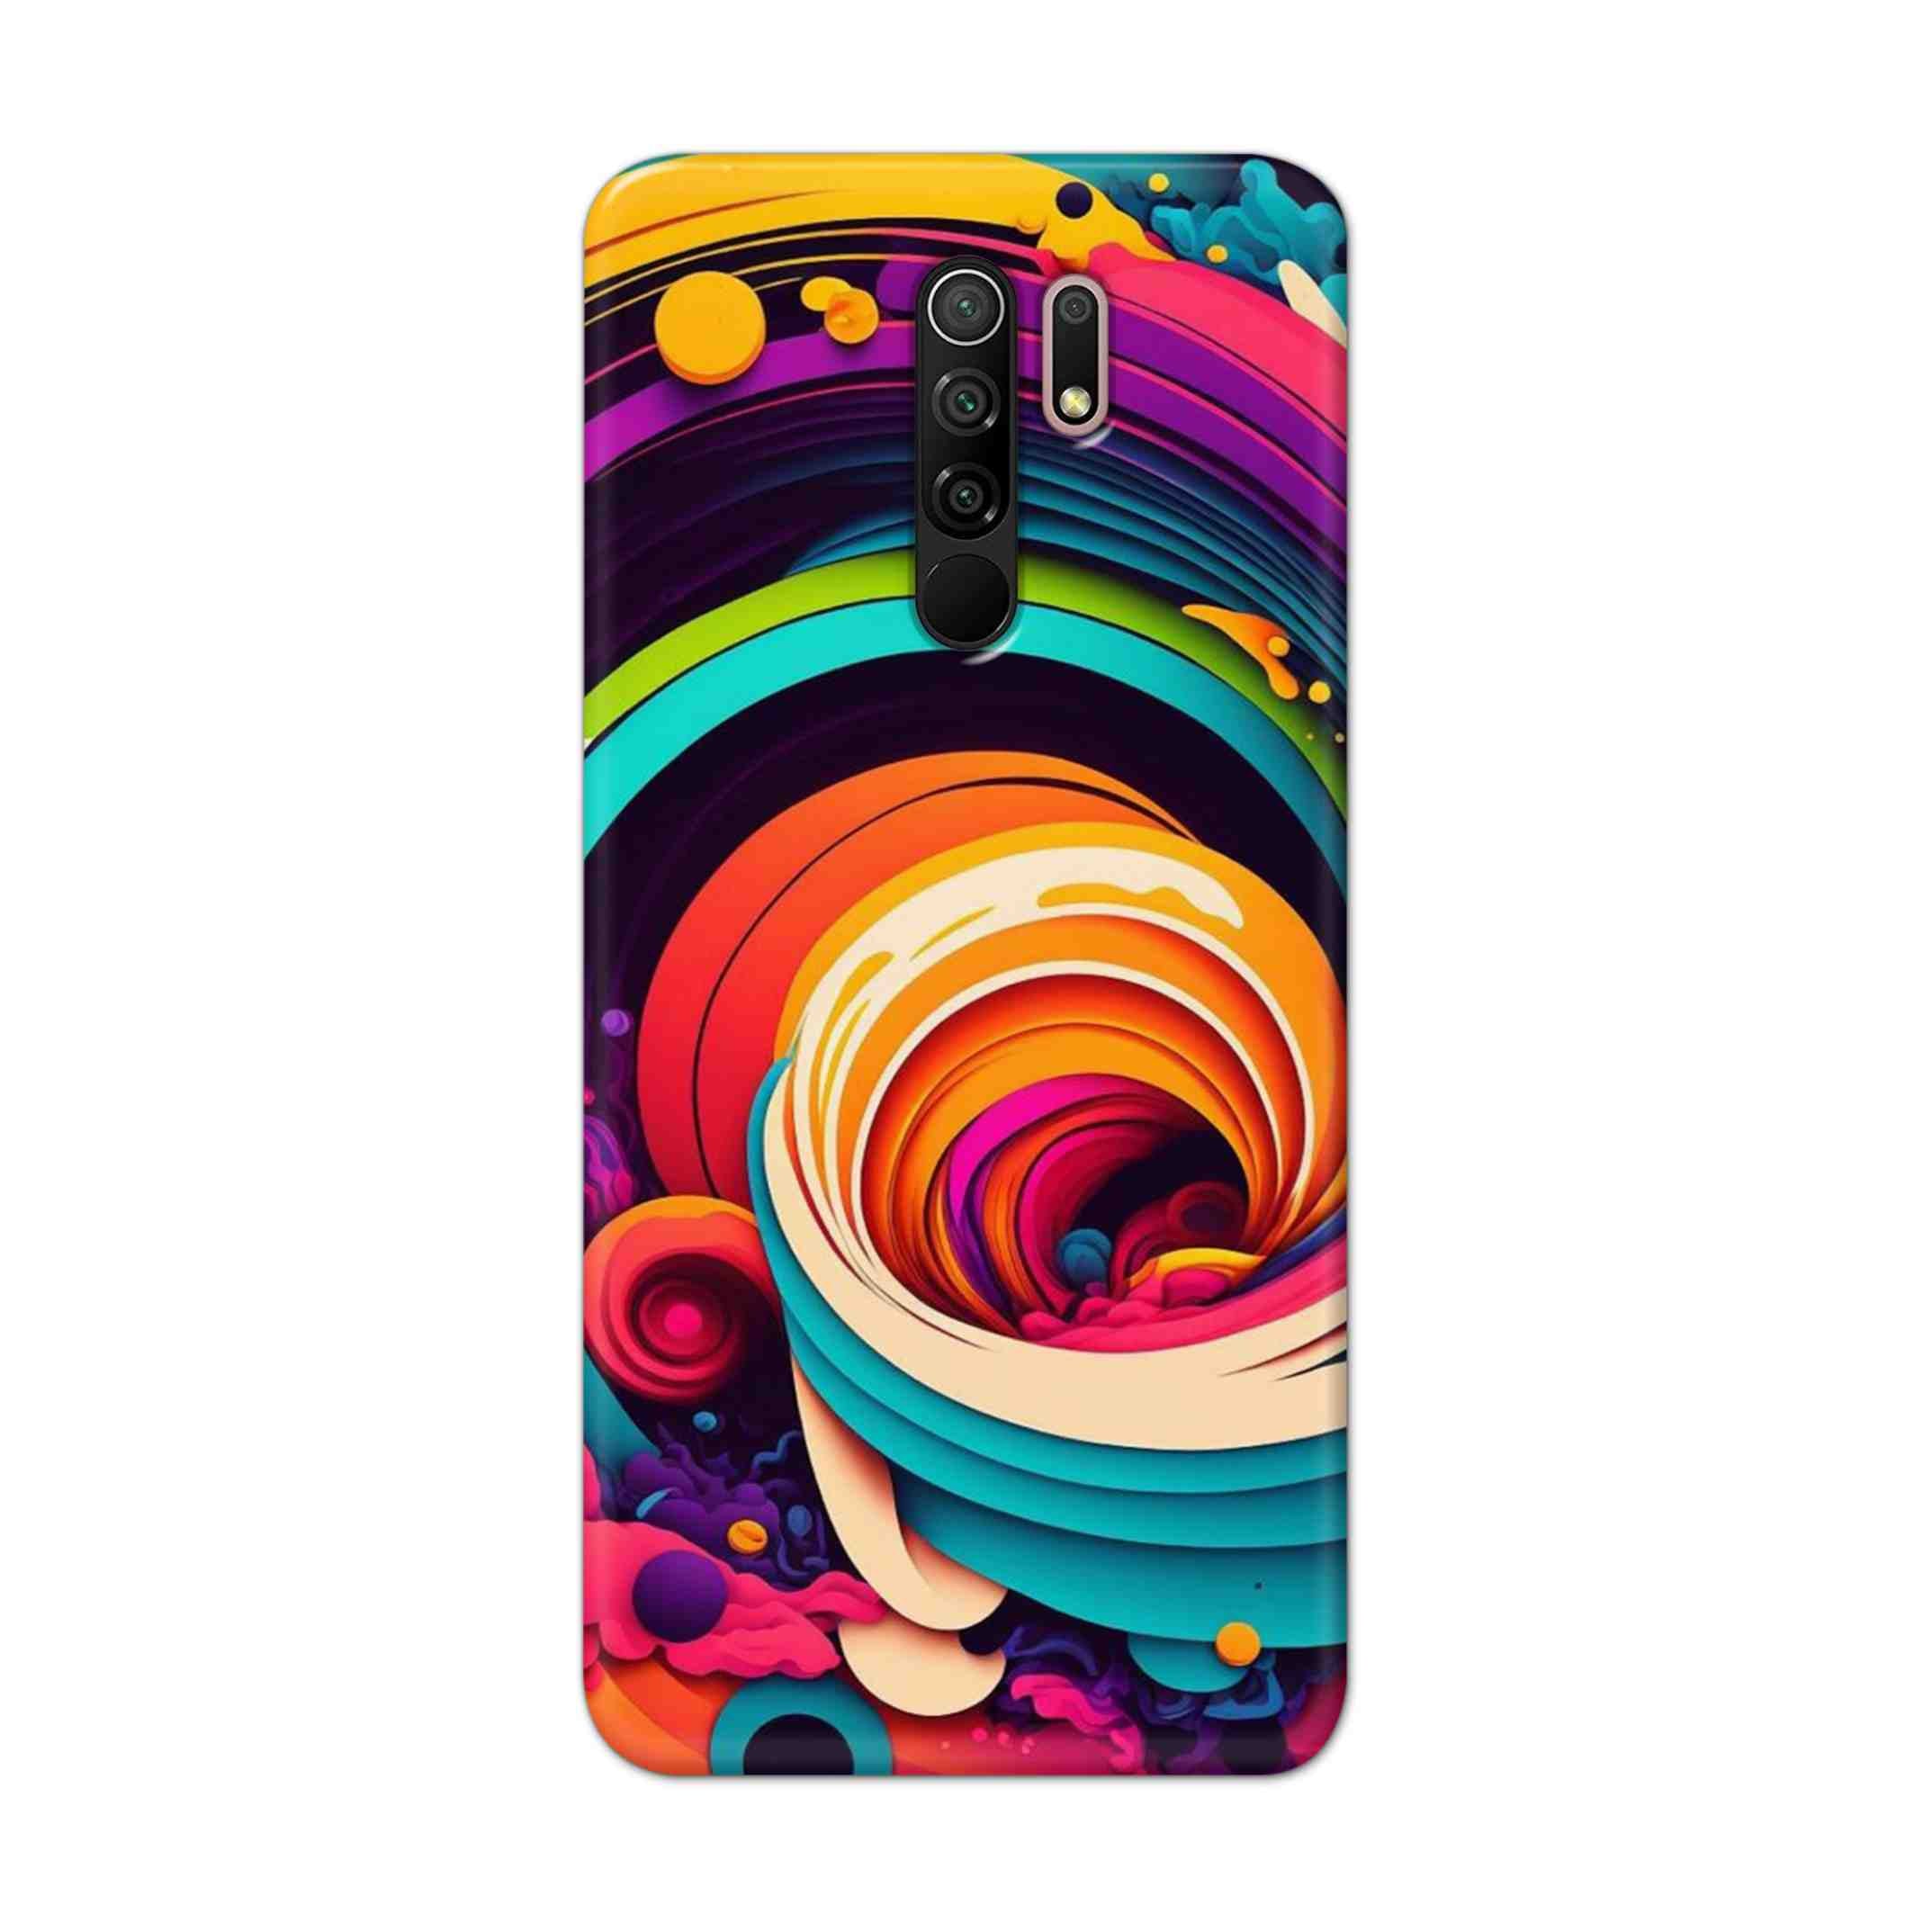 Buy Colour Circle Hard Back Mobile Phone Case Cover For Xiaomi Redmi 9 Prime Online